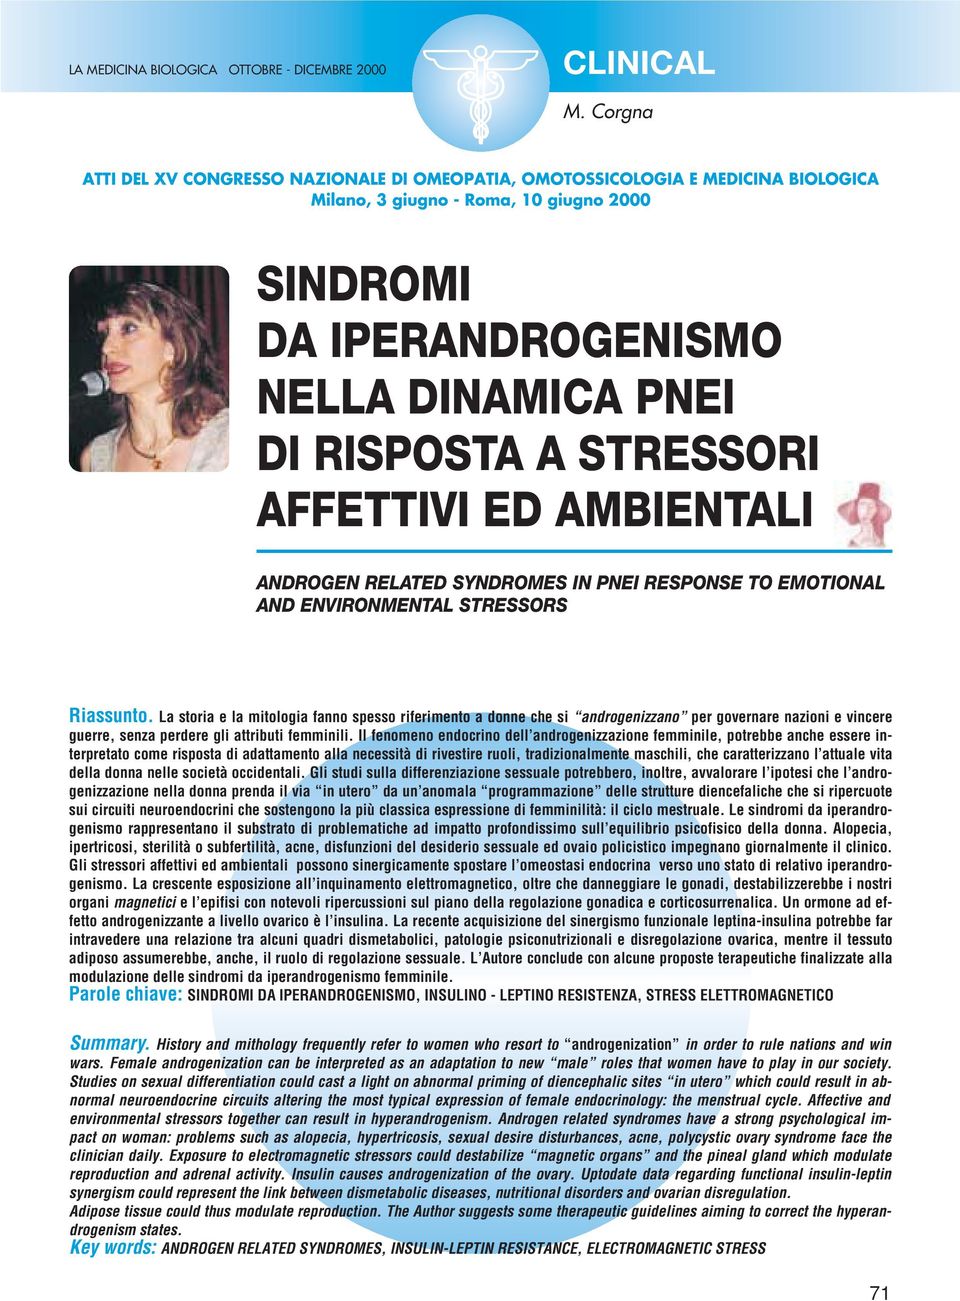 STRESSORI AFFETTIVI ED AMBIENTALI ANDROGEN RELATED SYNDROMES IN PNEI RESPONSE TO EMOTIONAL AND ENVIRONMENTAL STRESSORS Riassunto.